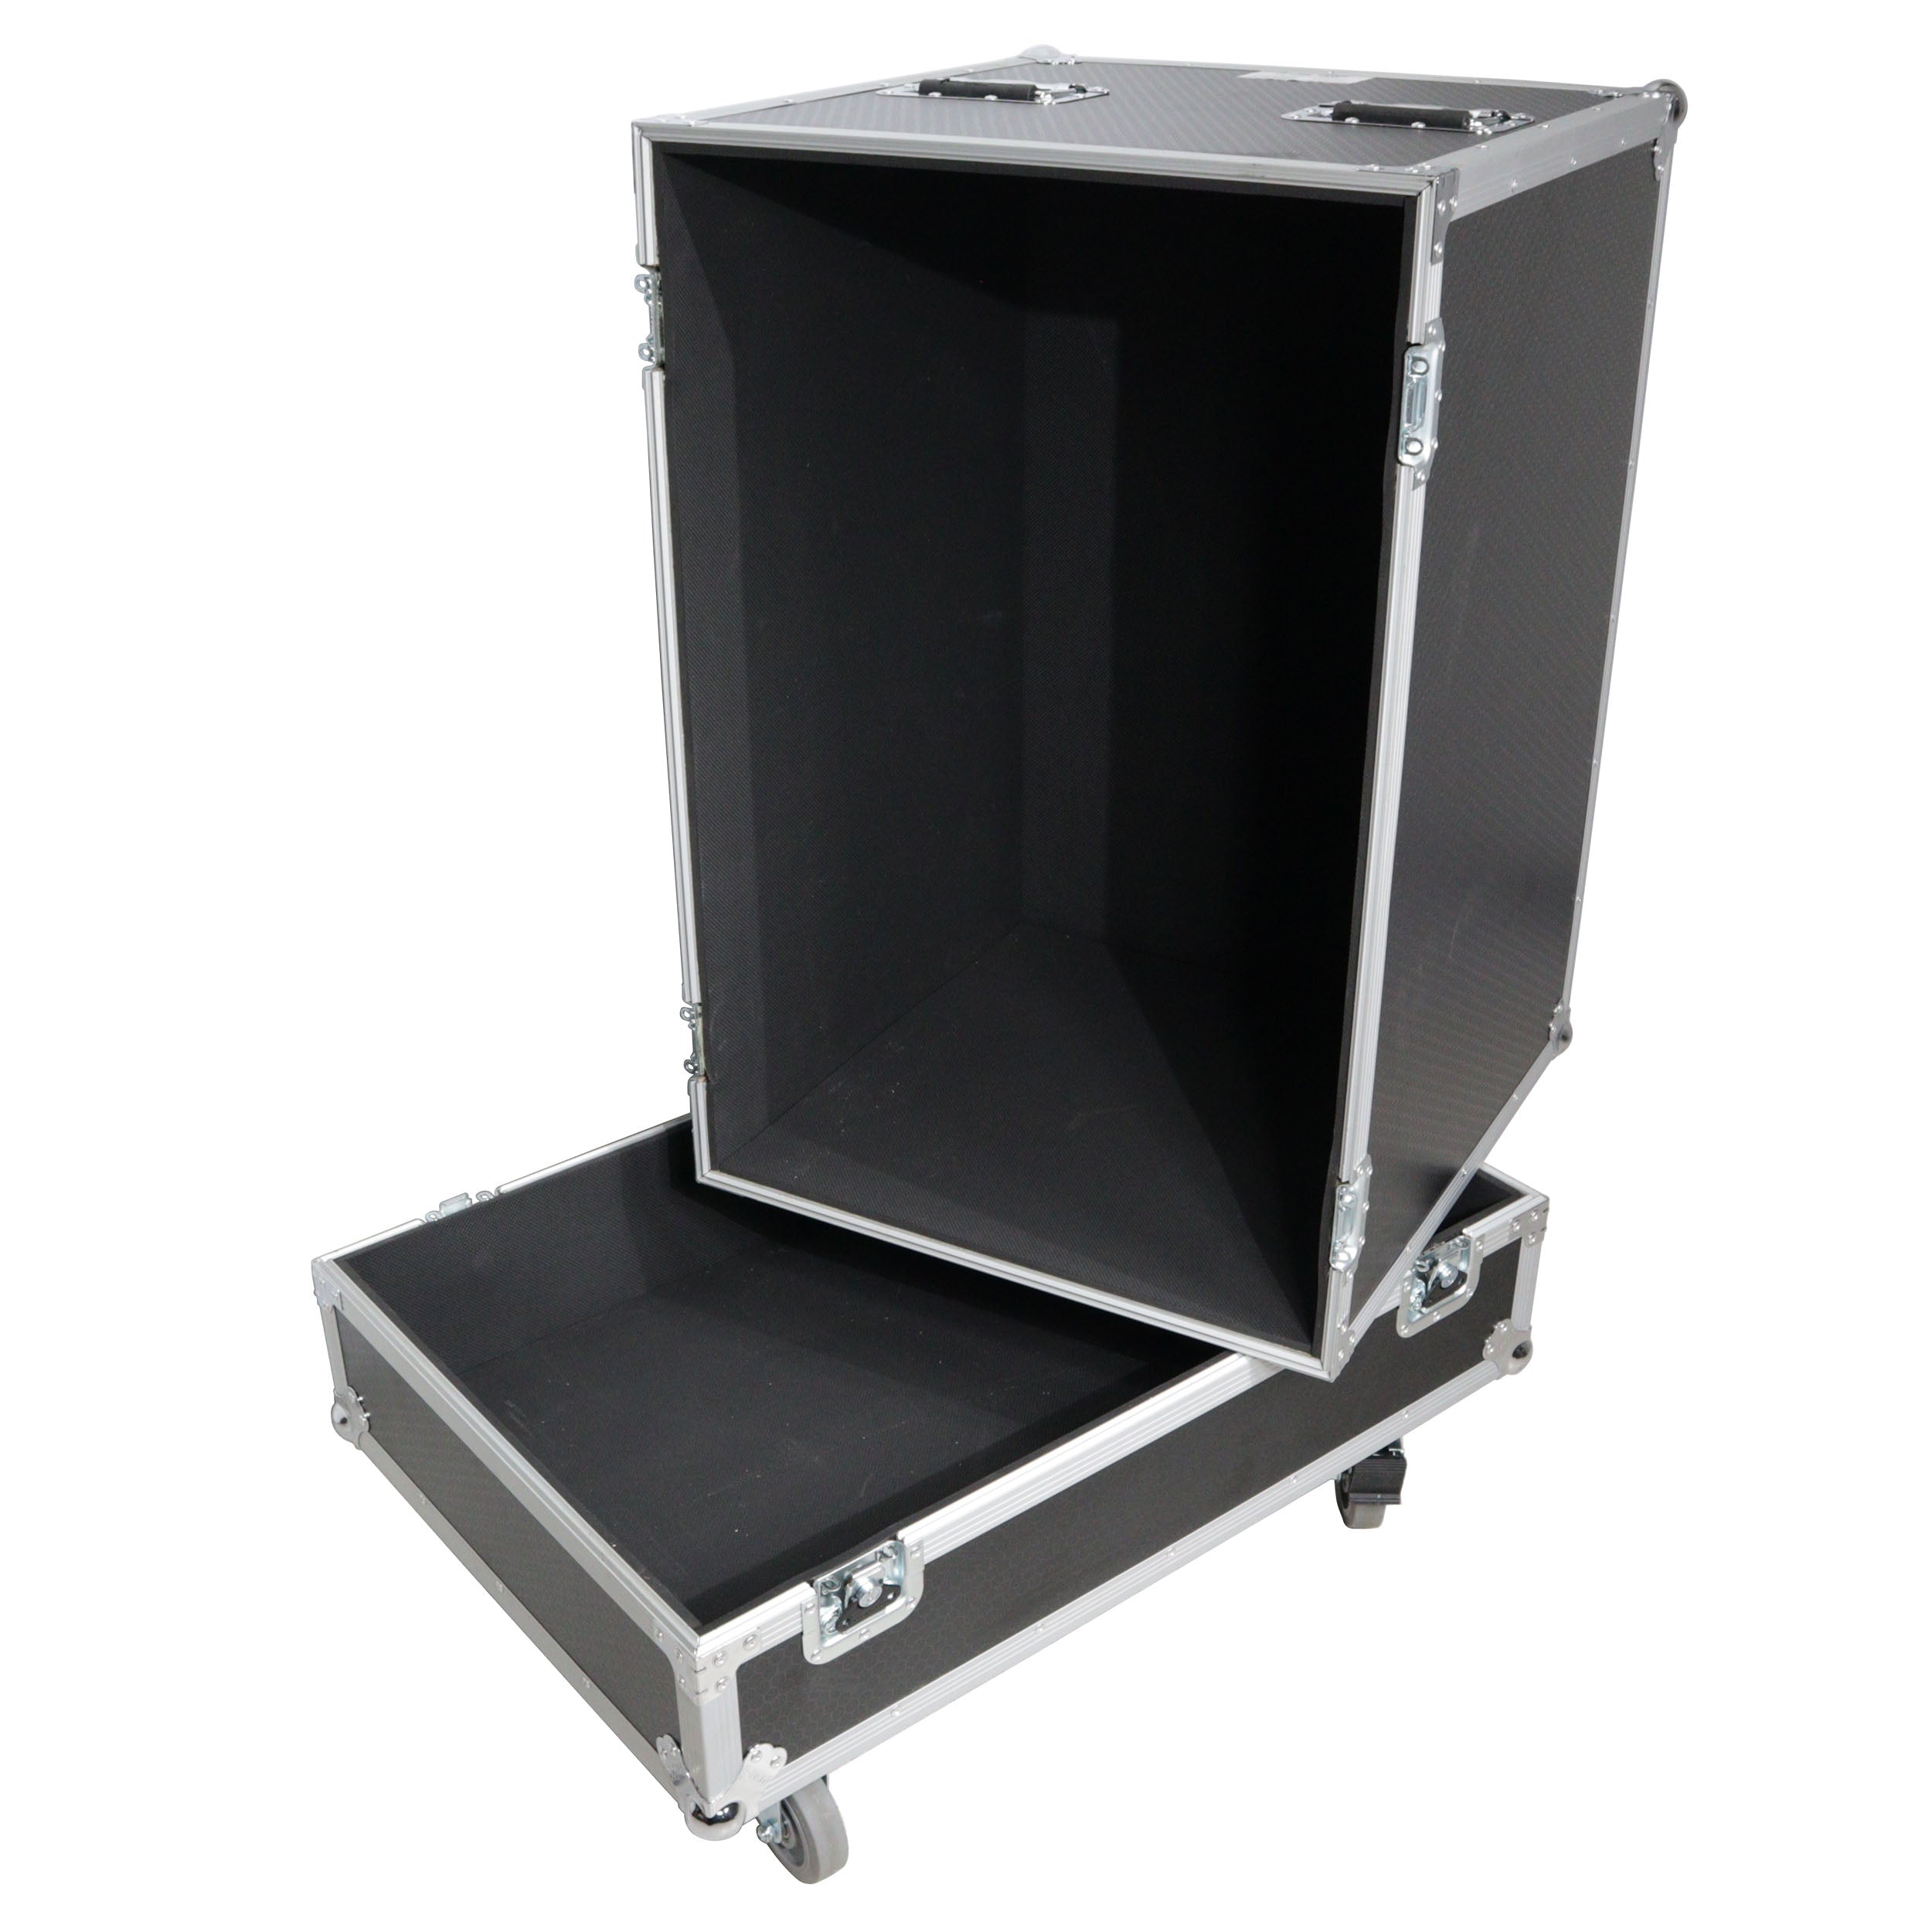 Pro X Universal ATA Speaker Flight Case for RCF 6x HDL6A / HDL26A 1x QSC KS118 Speaker and most similar size speakers 32x21x27 in XS-SP322127W